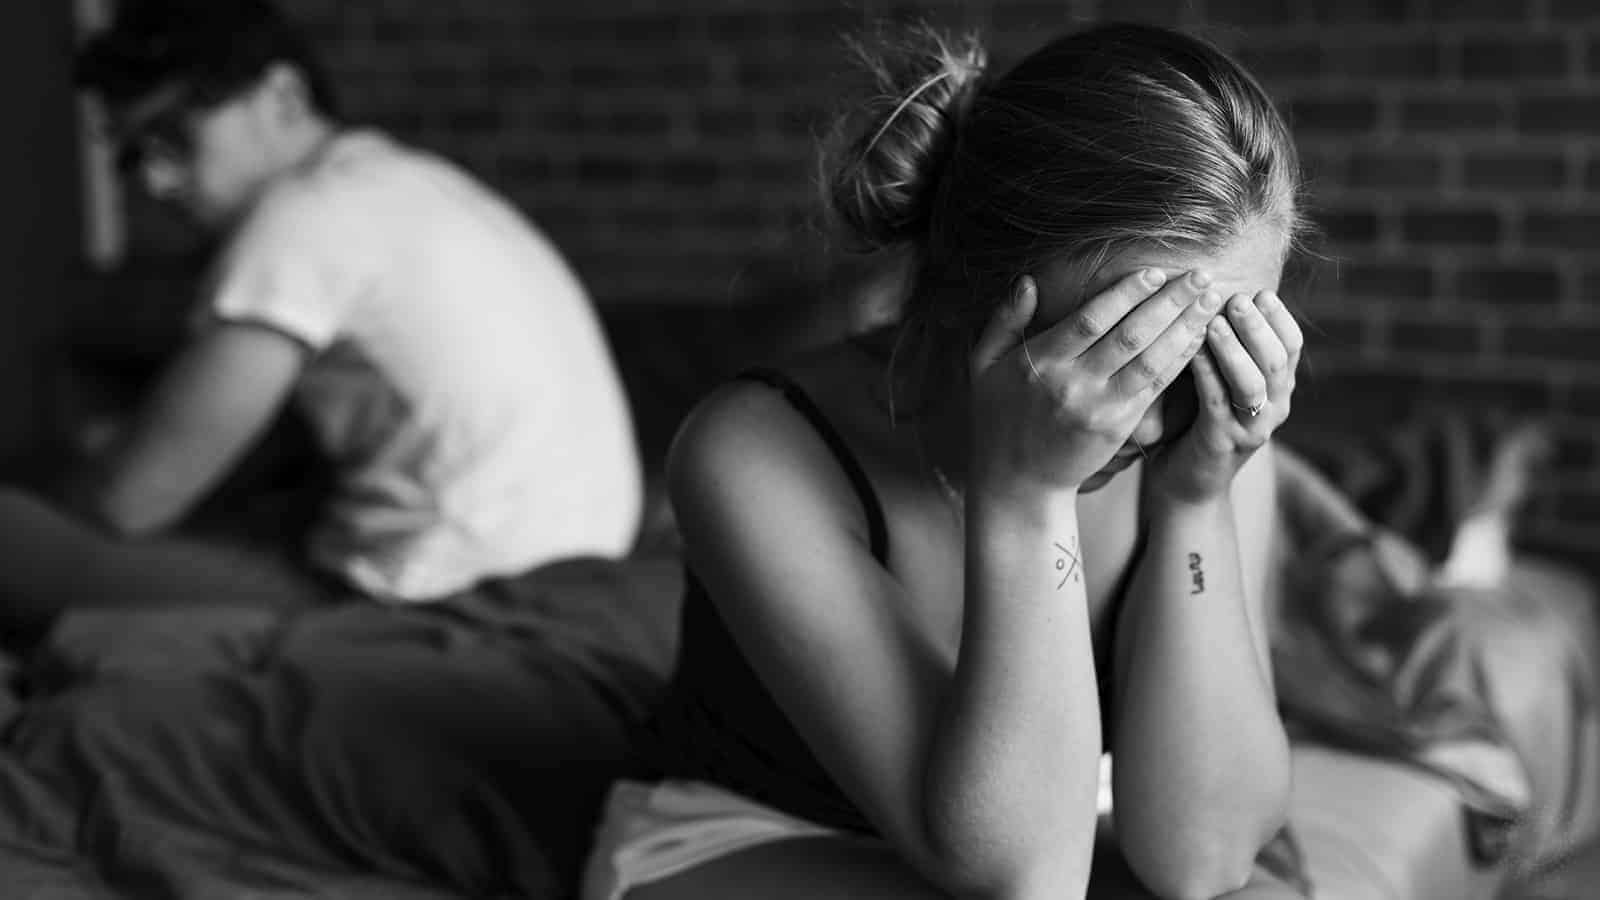 25 Red Flags of a Toxic and Unhealthy Relationship